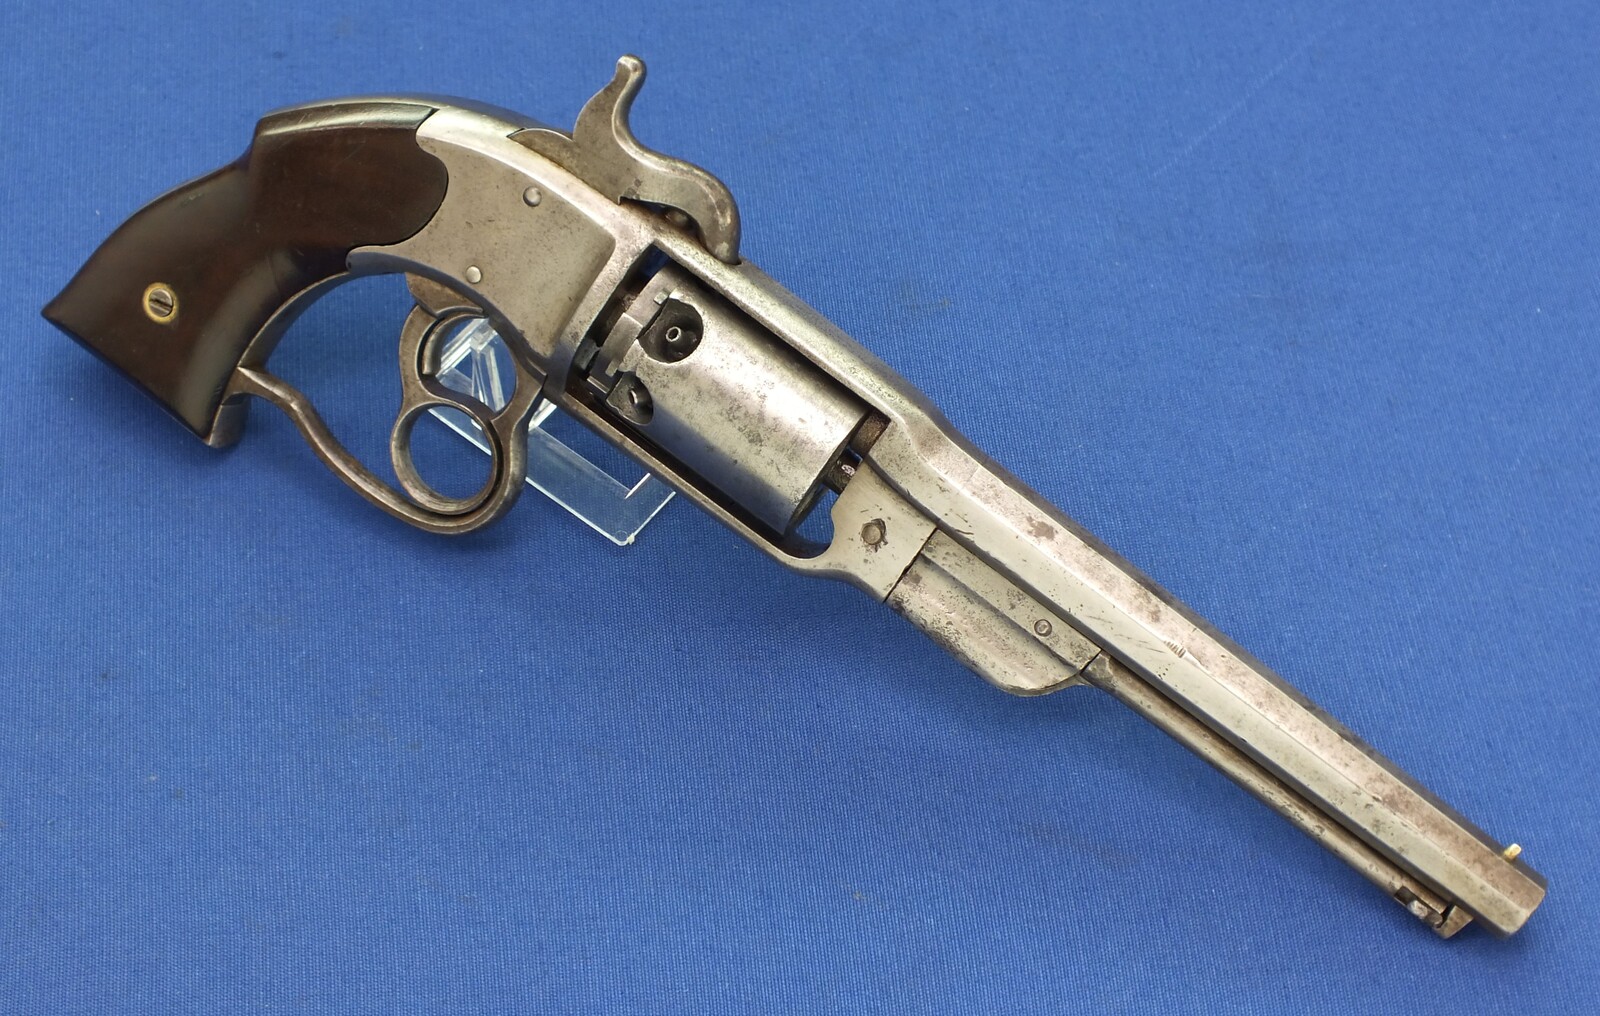 A very nice antique American Civil War Savage Rivolving Fire-Arms Co Navy Model Percussion Revolver, .36 caliber, 6 shot, 7 1/8 inch barrel, length 38 cm, in very good condition. Price 2.175 euro.